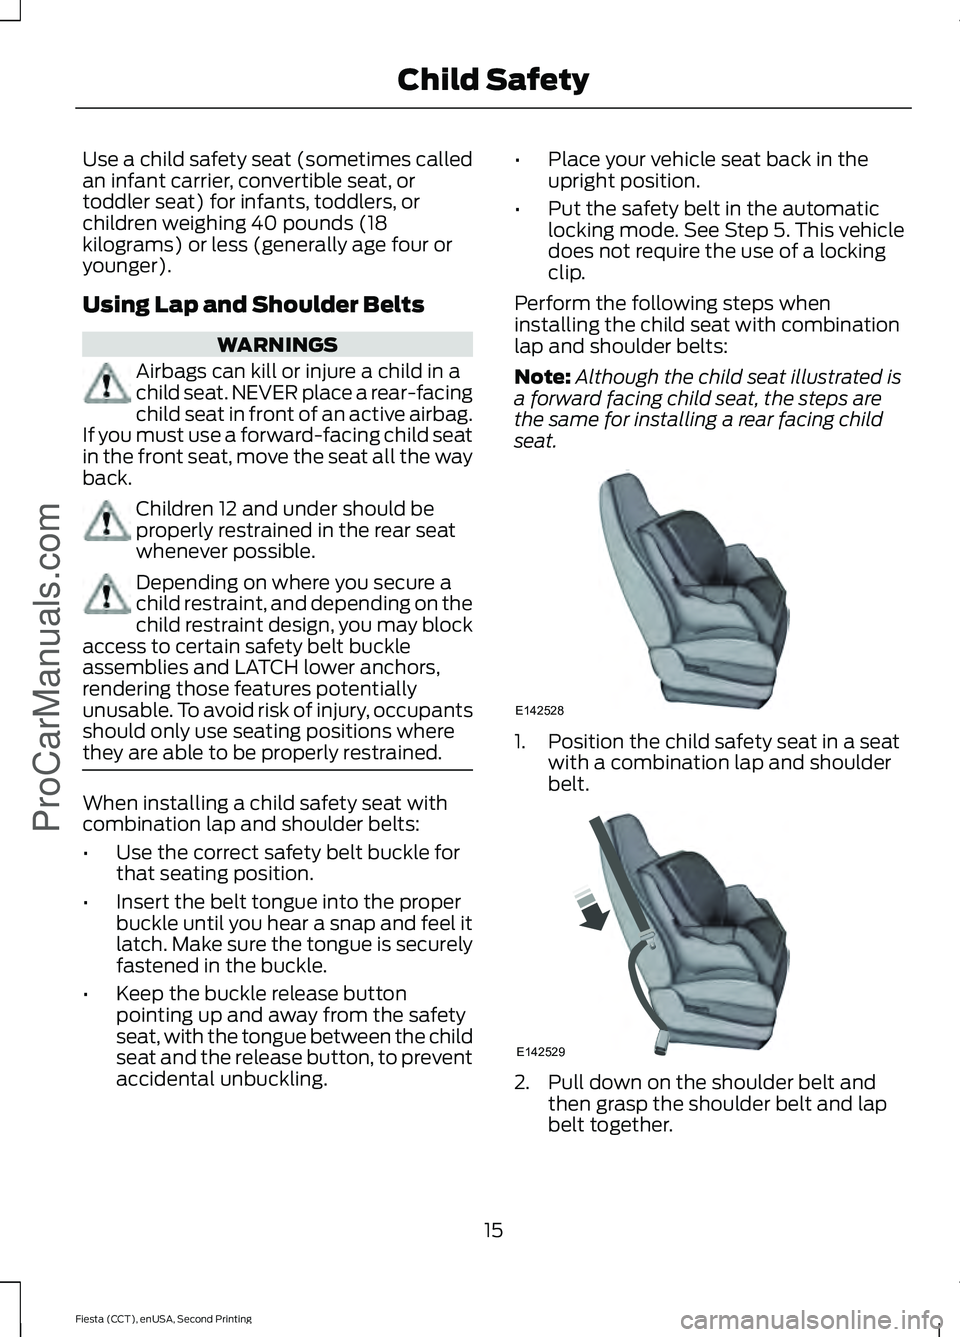 FORD FIESTA 2015  Owners Manual Use a child safety seat (sometimes called
an infant carrier, convertible seat, or
toddler seat) for infants, toddlers, or
children weighing 40 pounds (18
kilograms) or less (generally age four or
youn